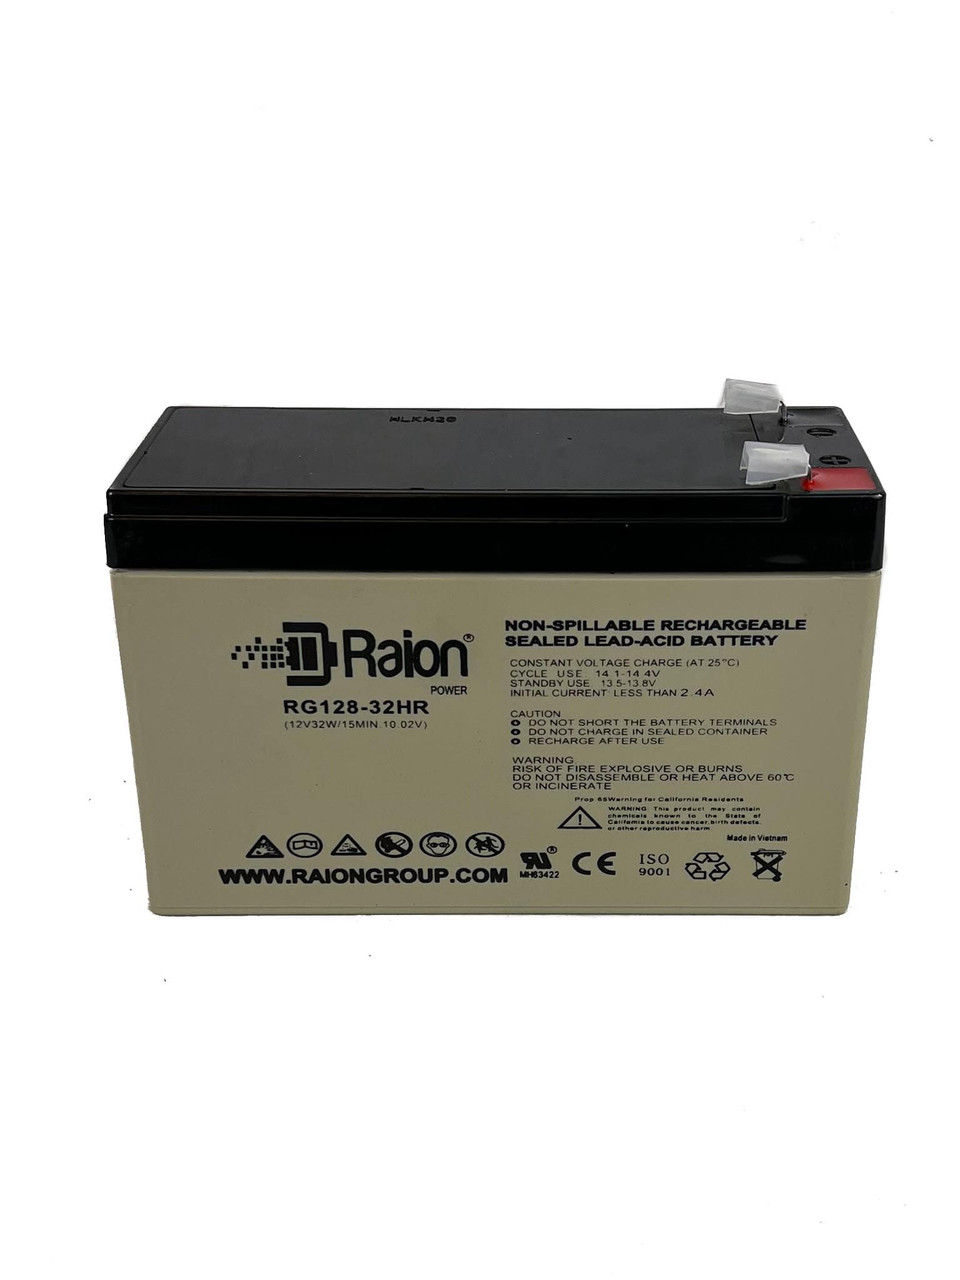 Raion Power RG128-32HR Replacement High Rate Battery Cartridge for APC RBC17J